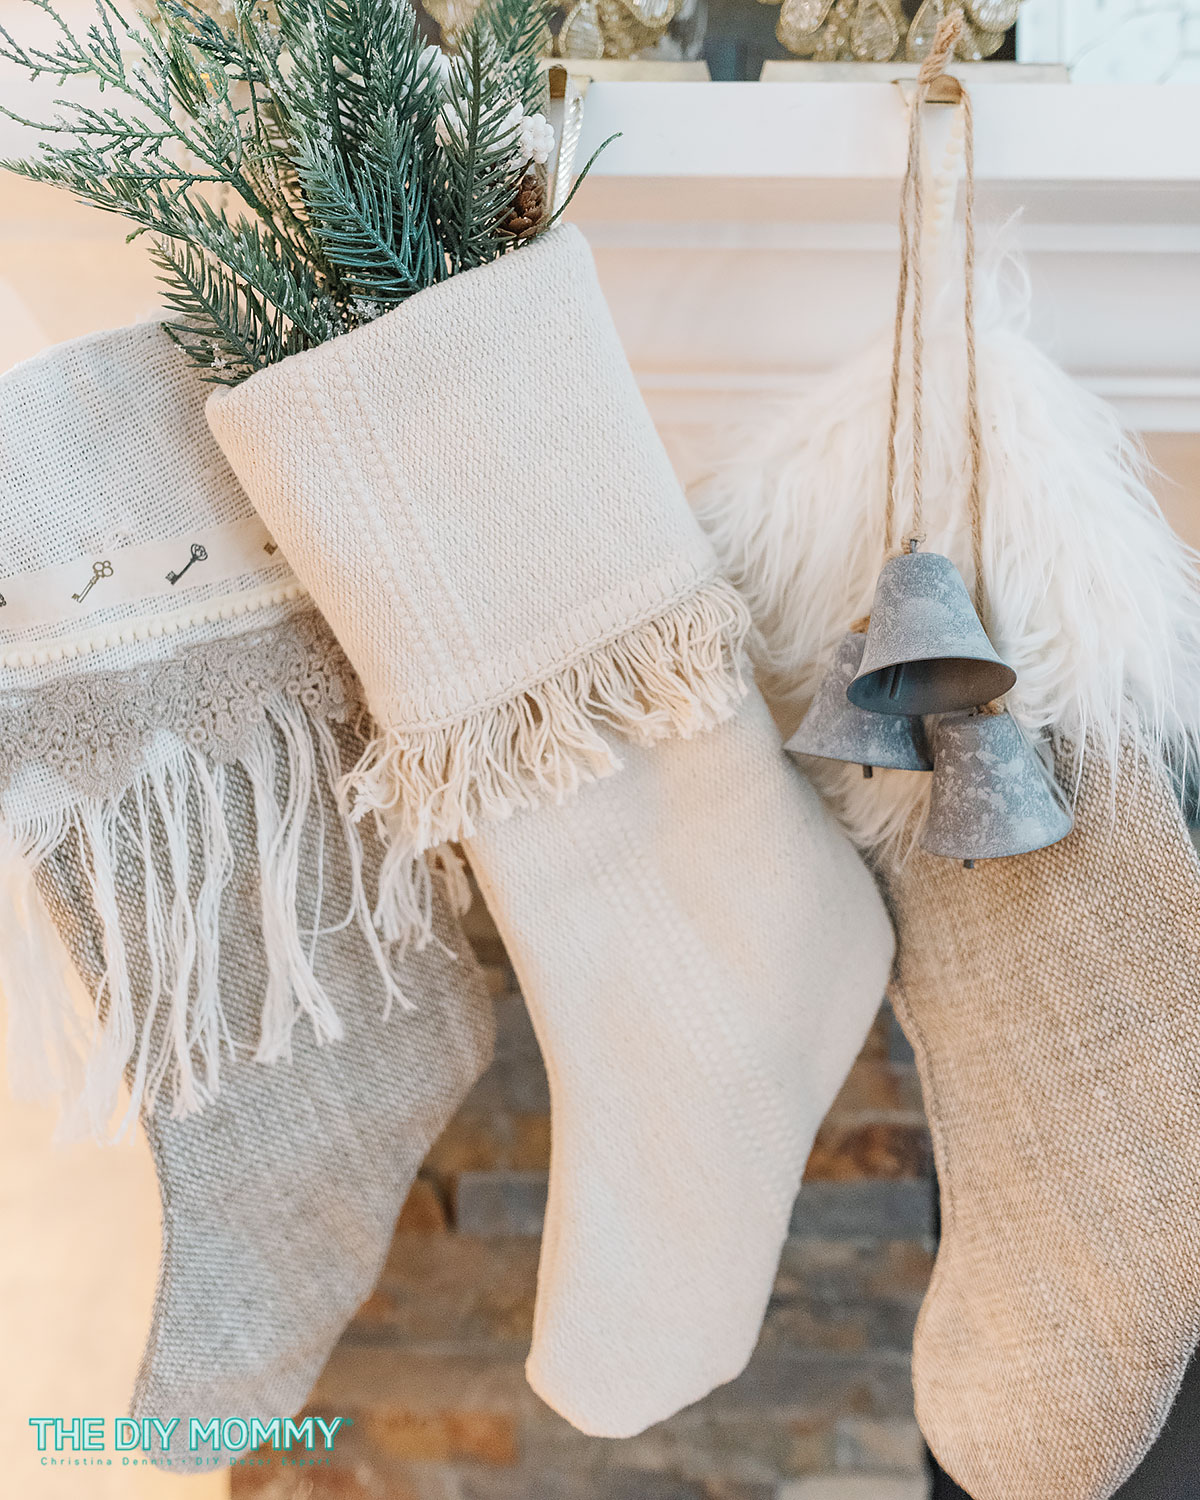 Fringed DIY Christmas stockings hang from the mantel